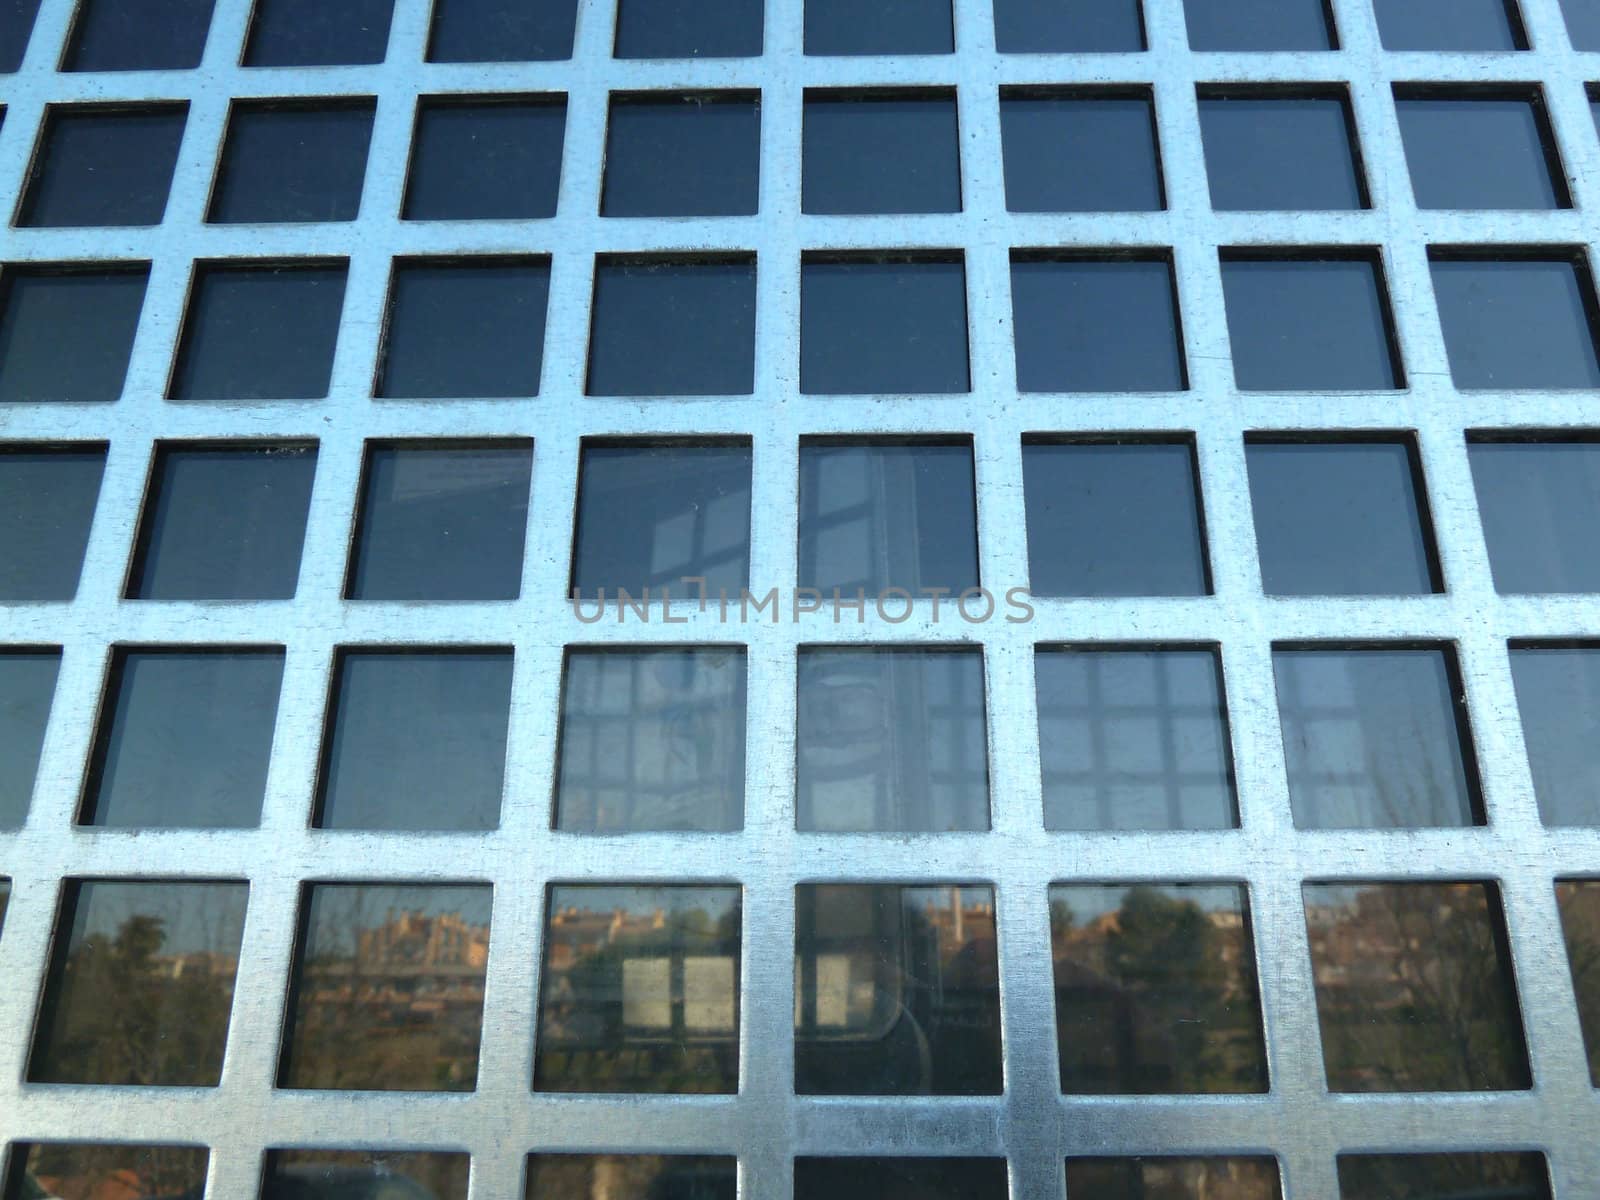 reflection in glass with a metal grid